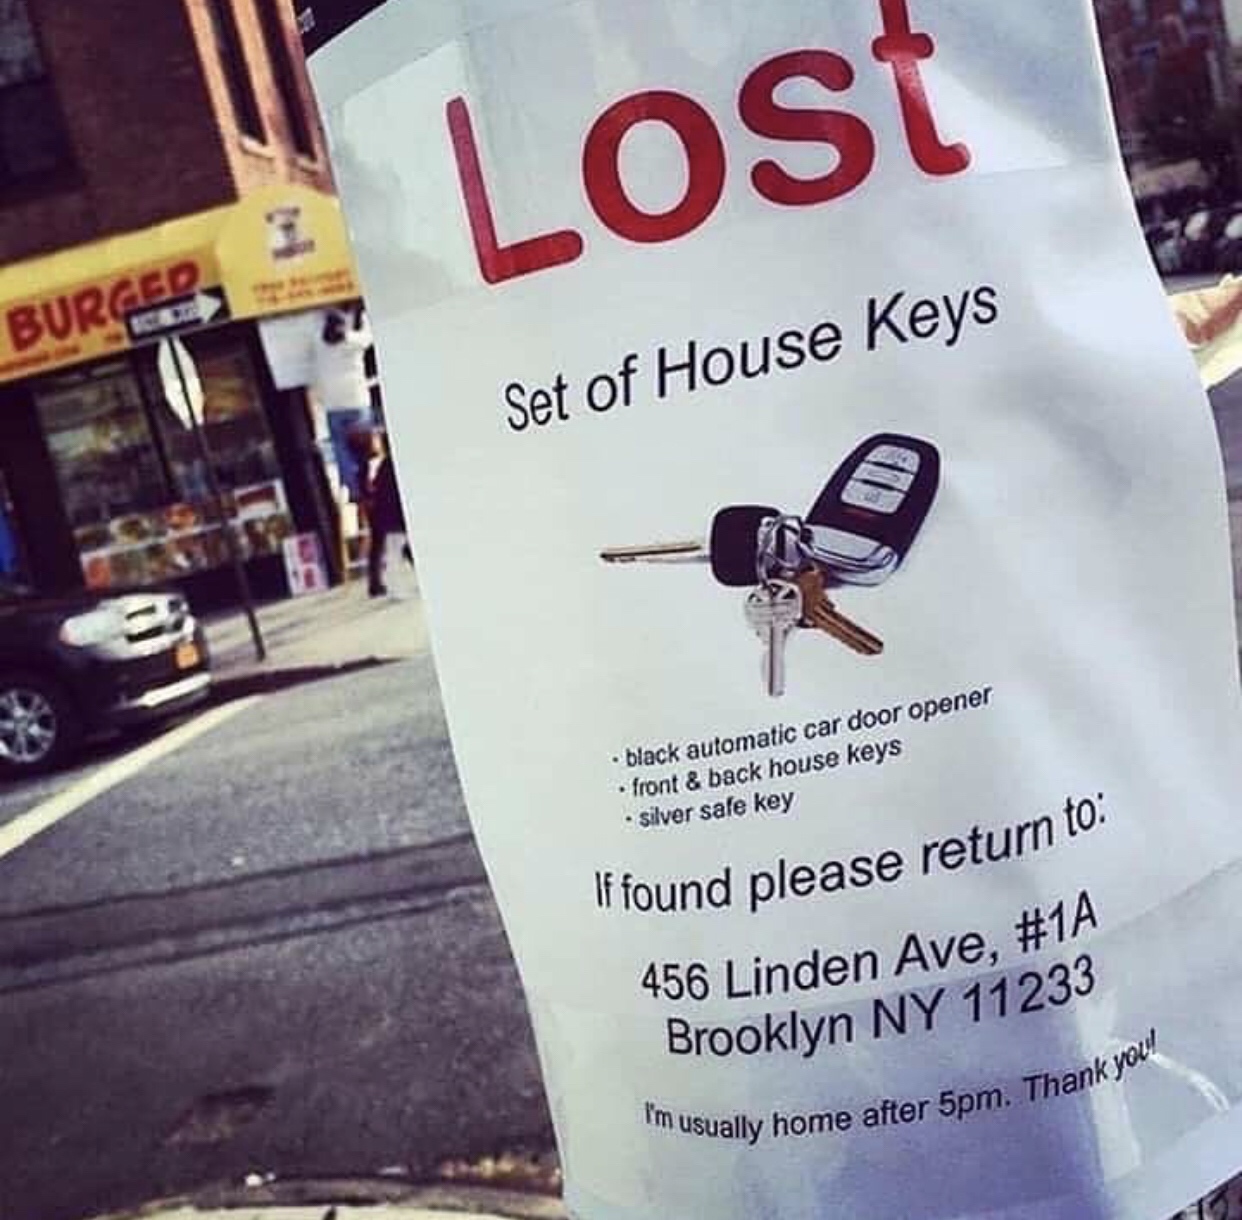 dank memes - lost set of house keys - Lost Burged Set of House Keys . black automatic car door opener . front & back house keys silver safe key If found please return to 456 Linden Ave, Brooklyn Ny 11233 I'm usually home after 5pm. Thank you!